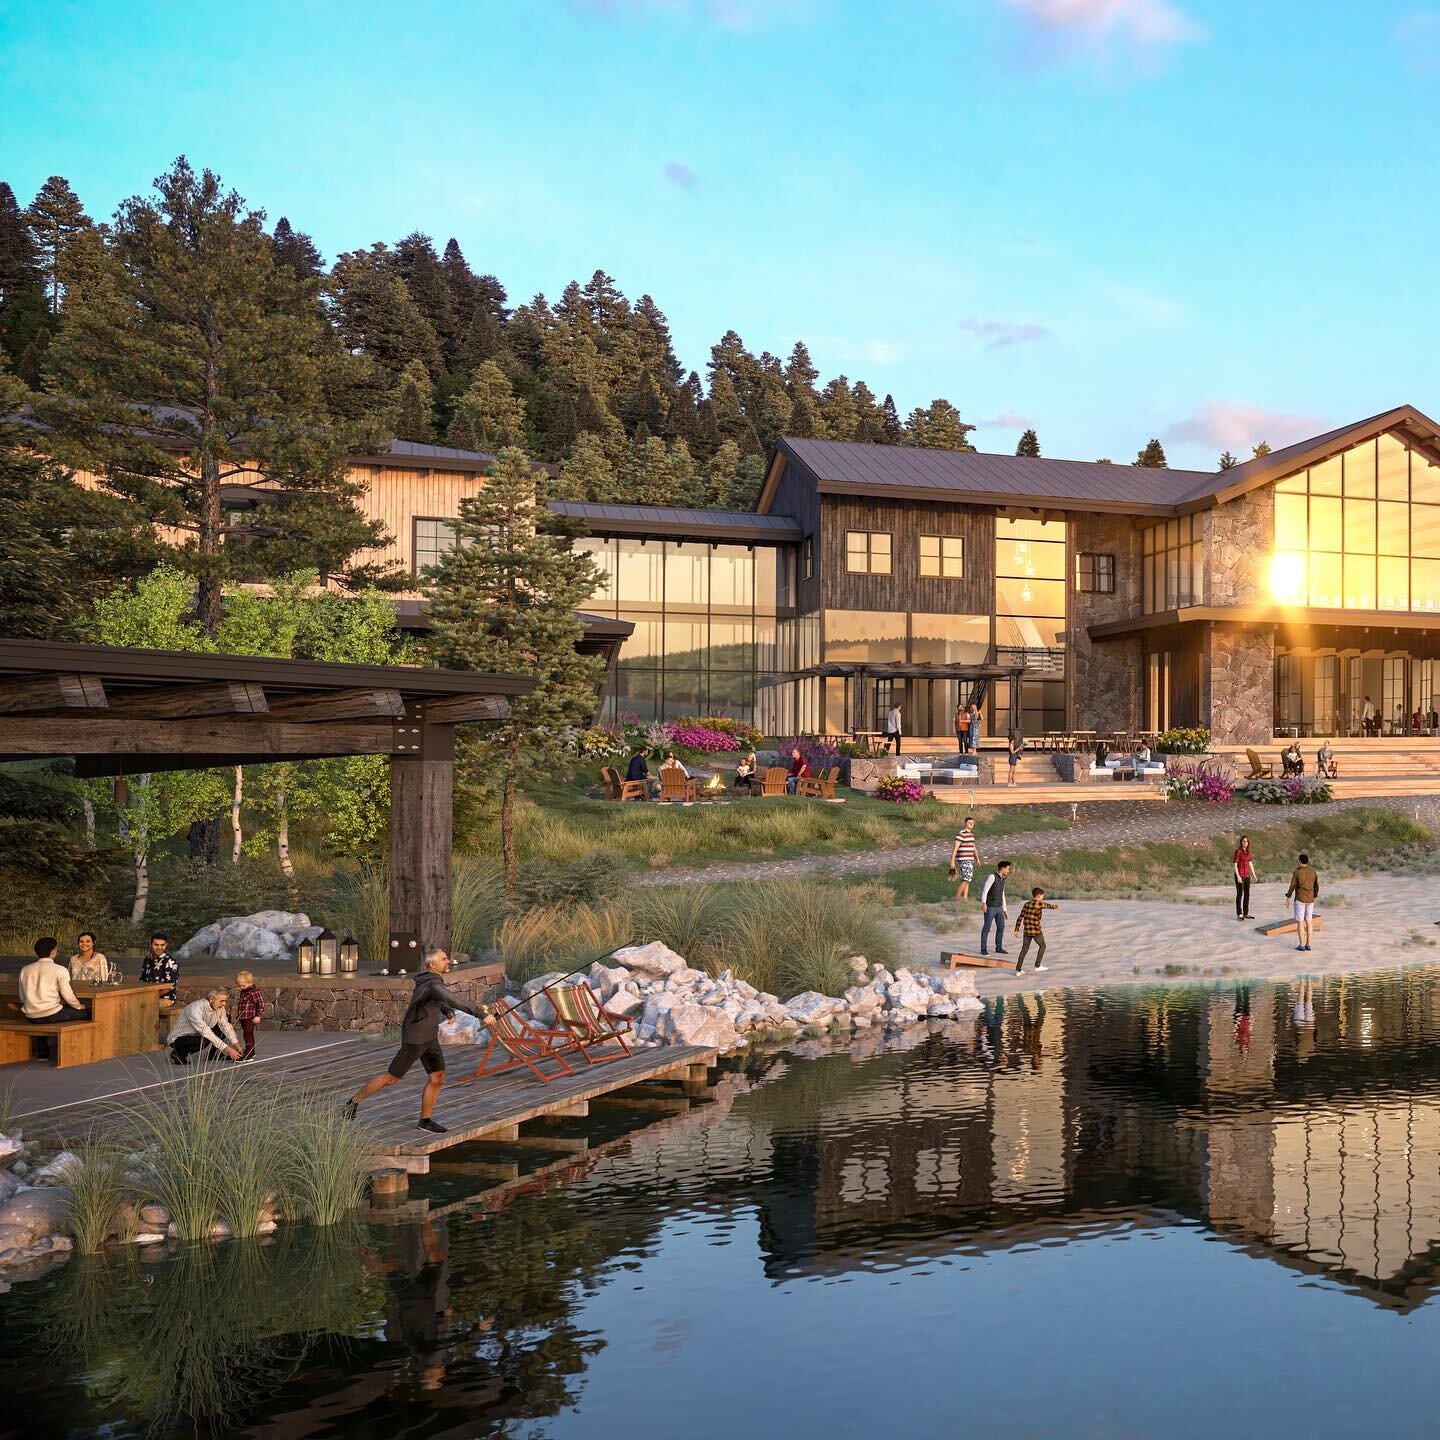 Escape to the great outdoors at this mountain retreat center.
.
Architecture by @359design 
.
.
.

#archviz #architecture #architecturevisualization #photorealism #interiordesign #cgi #3dsmax #coronarender #vray #archdaily #renderzone #renderweekly #